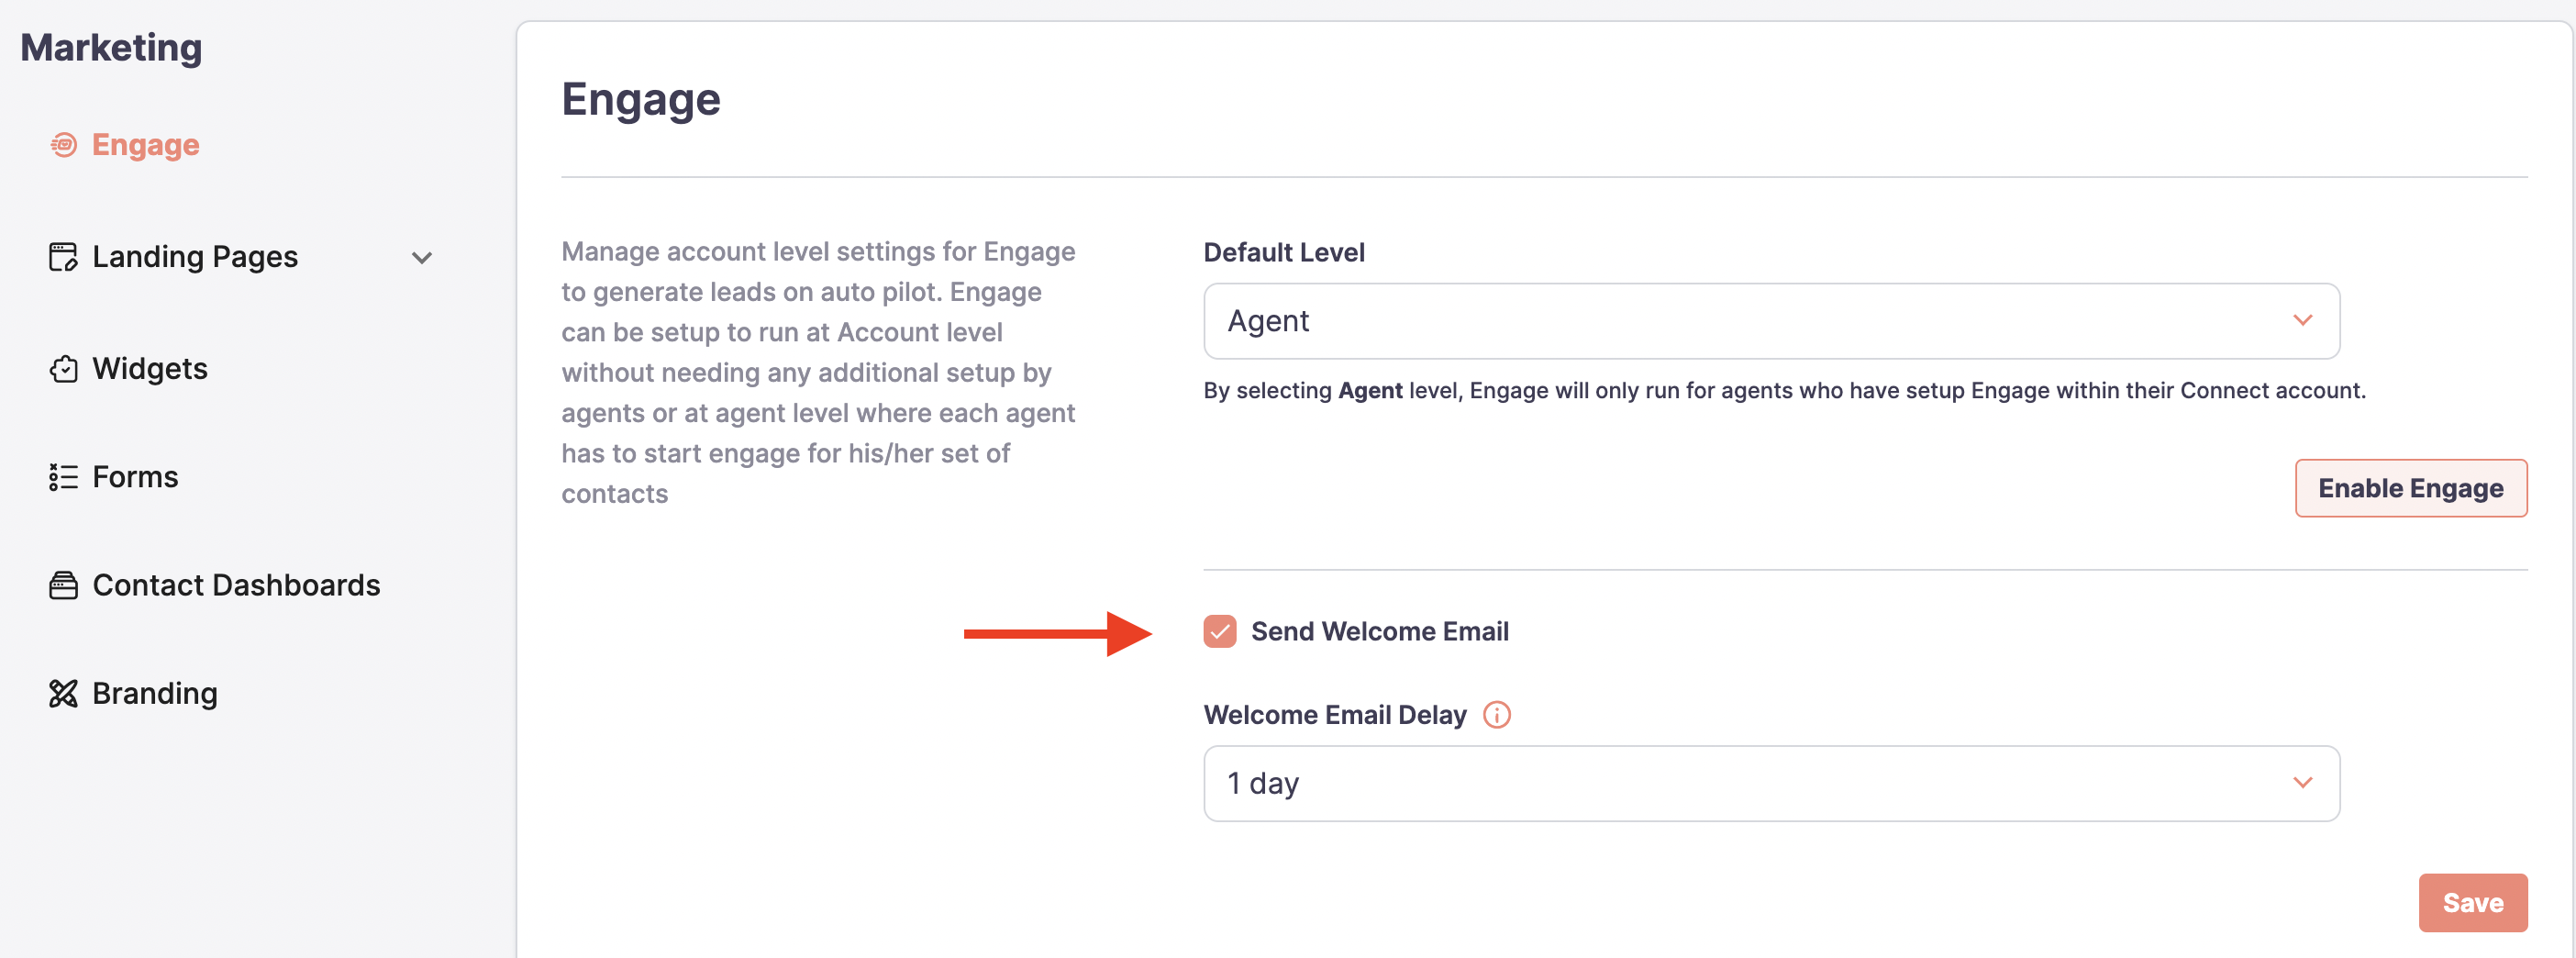 Checkbox to enable initial welcome email